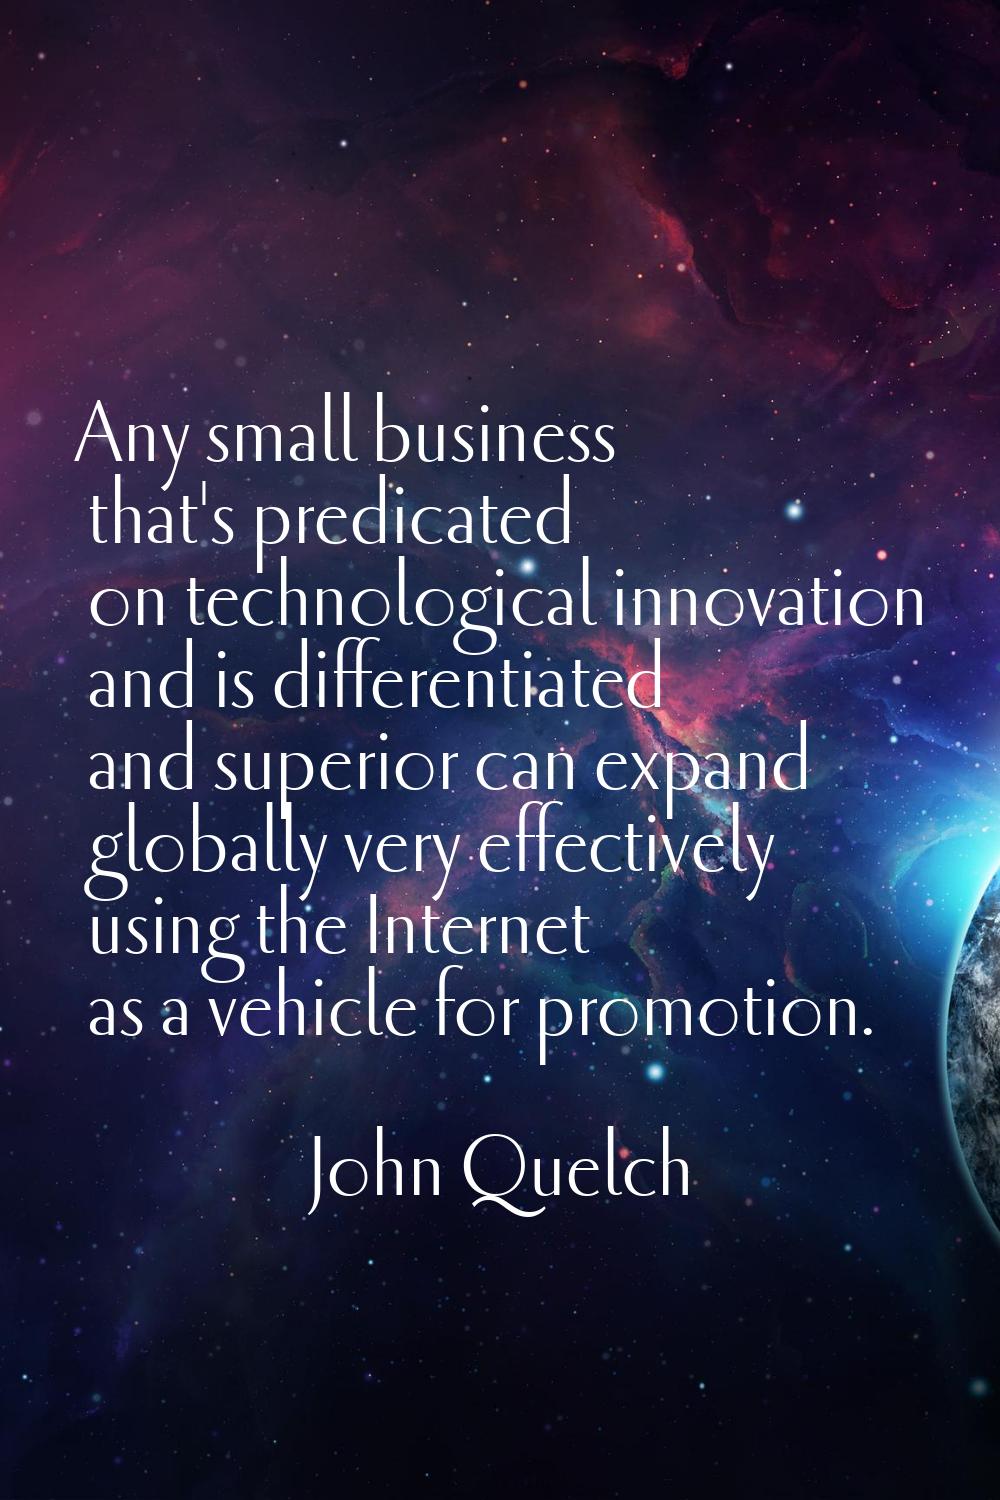 Any small business that's predicated on technological innovation and is differentiated and superior